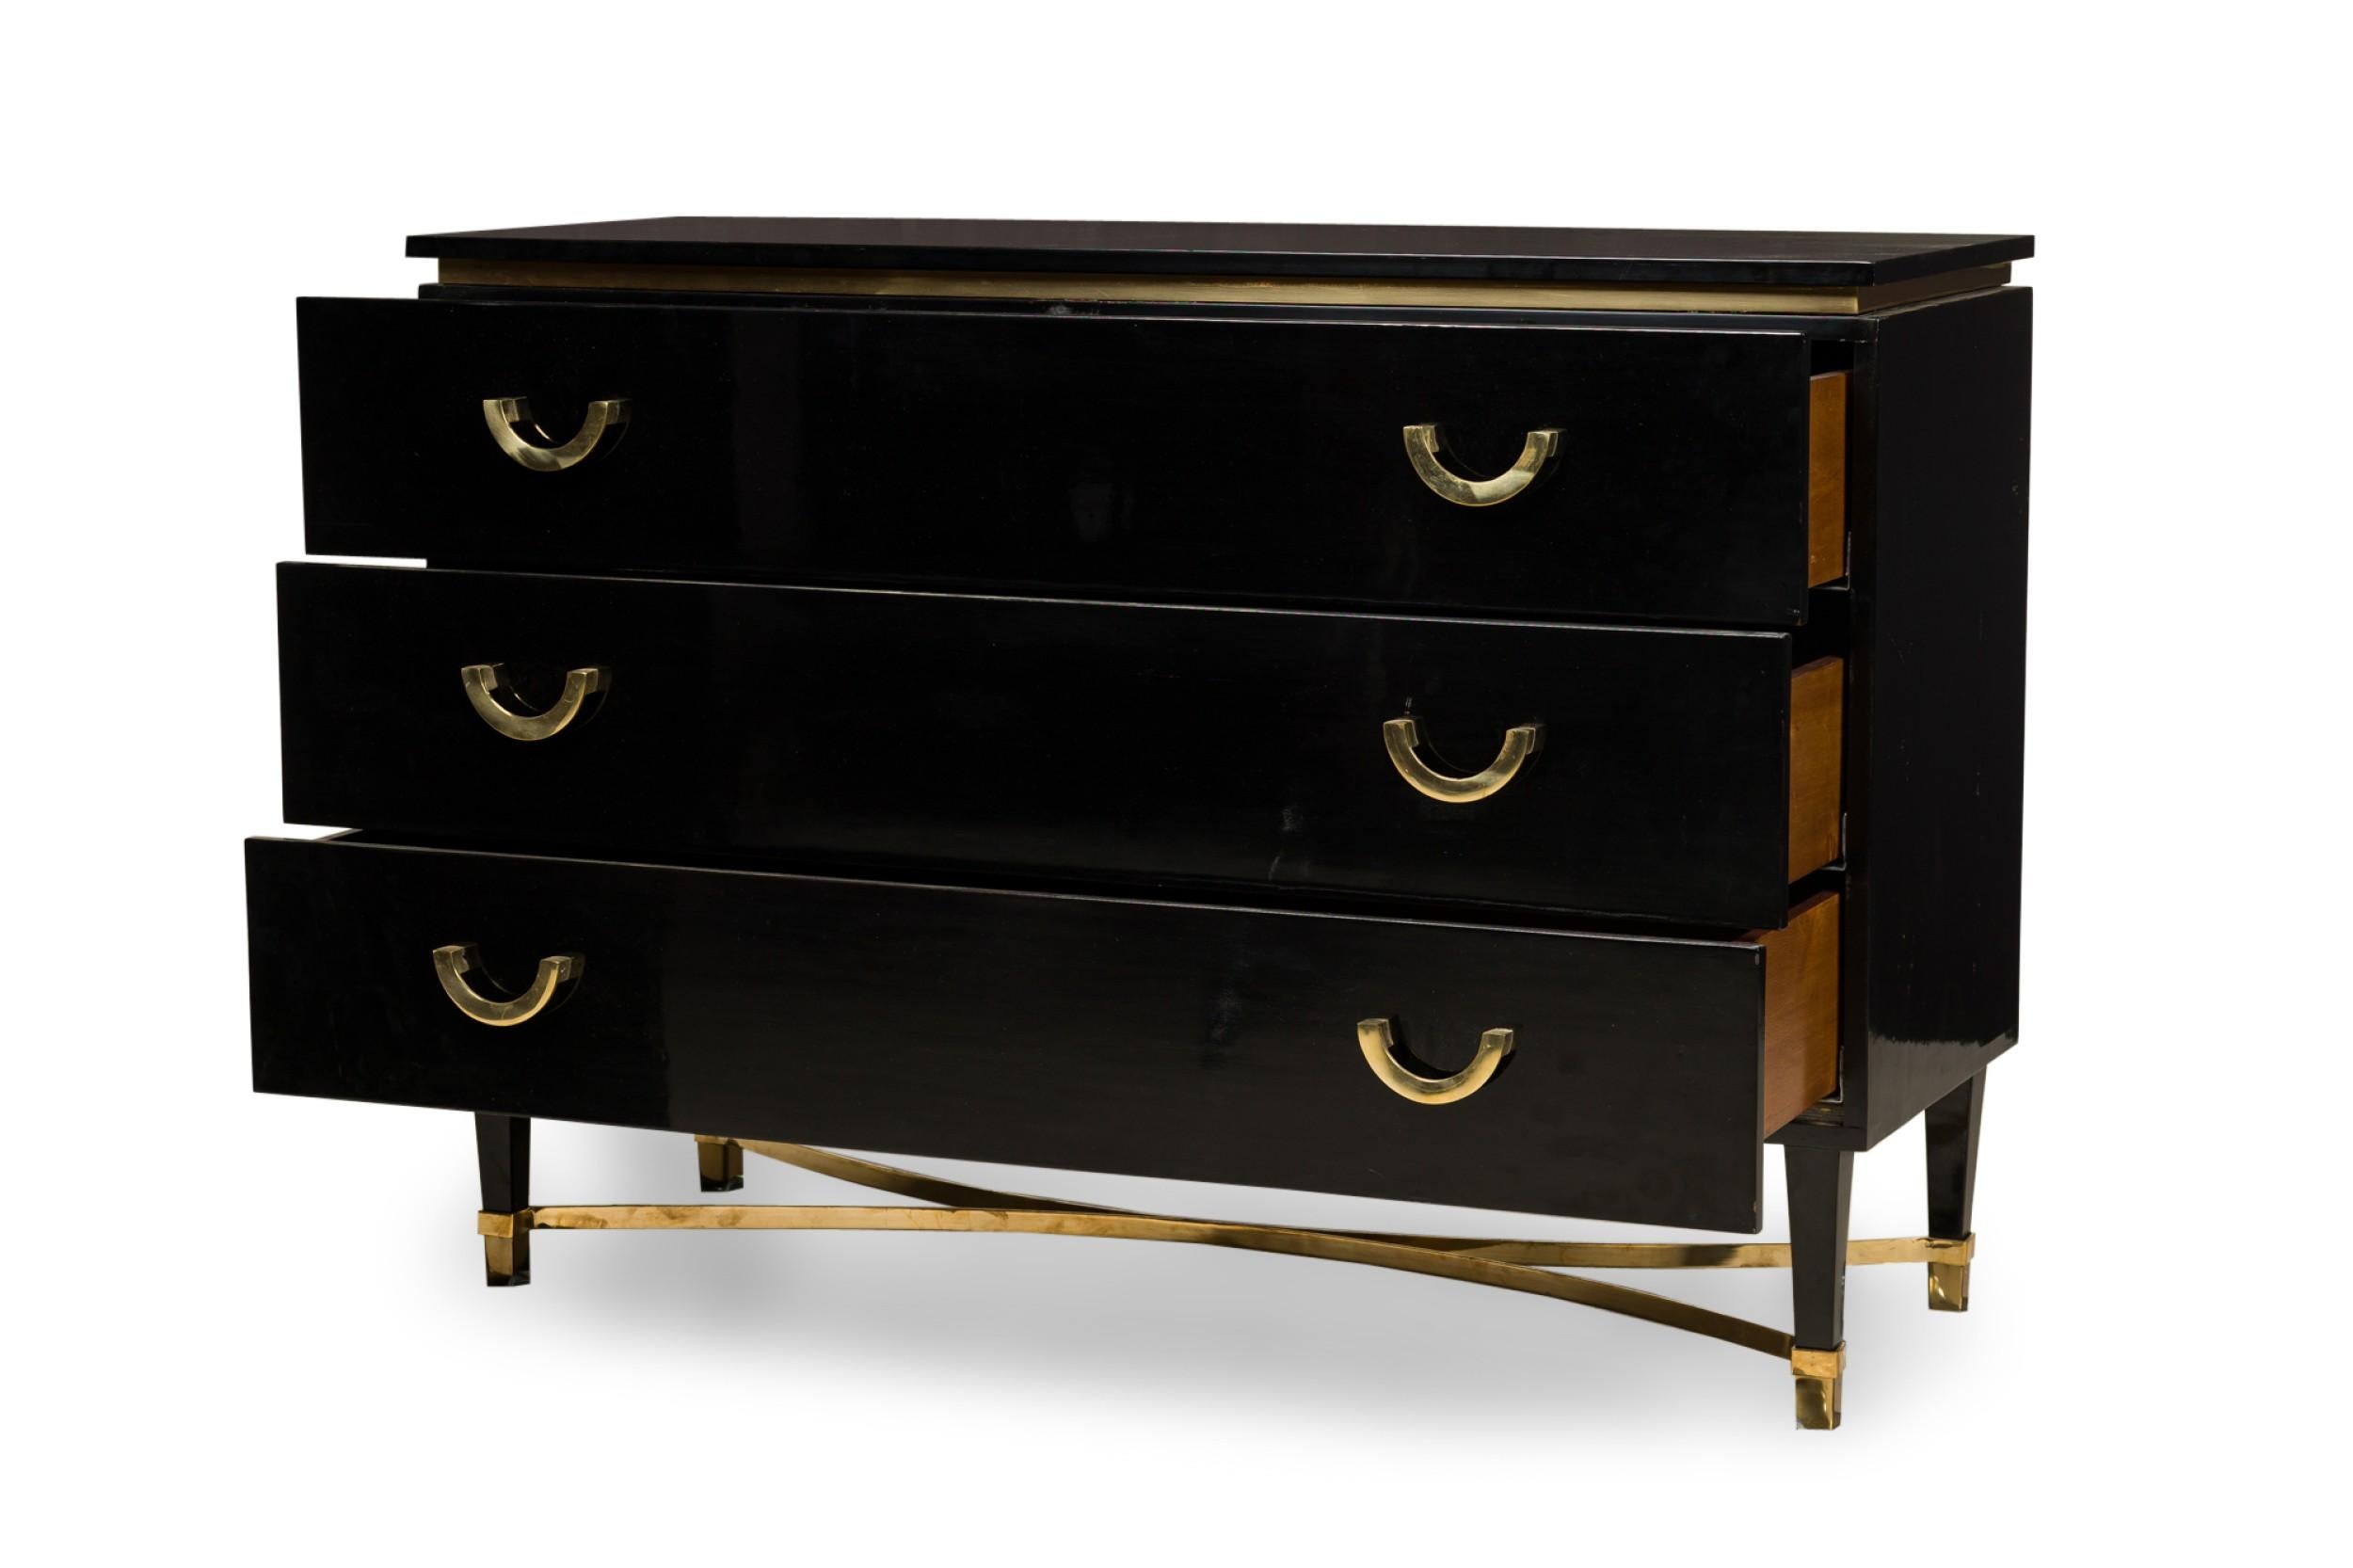 Pair of Continental Ebonized Wood & Bronze Mounted Dressers (Manner of Gucci) For Sale 2